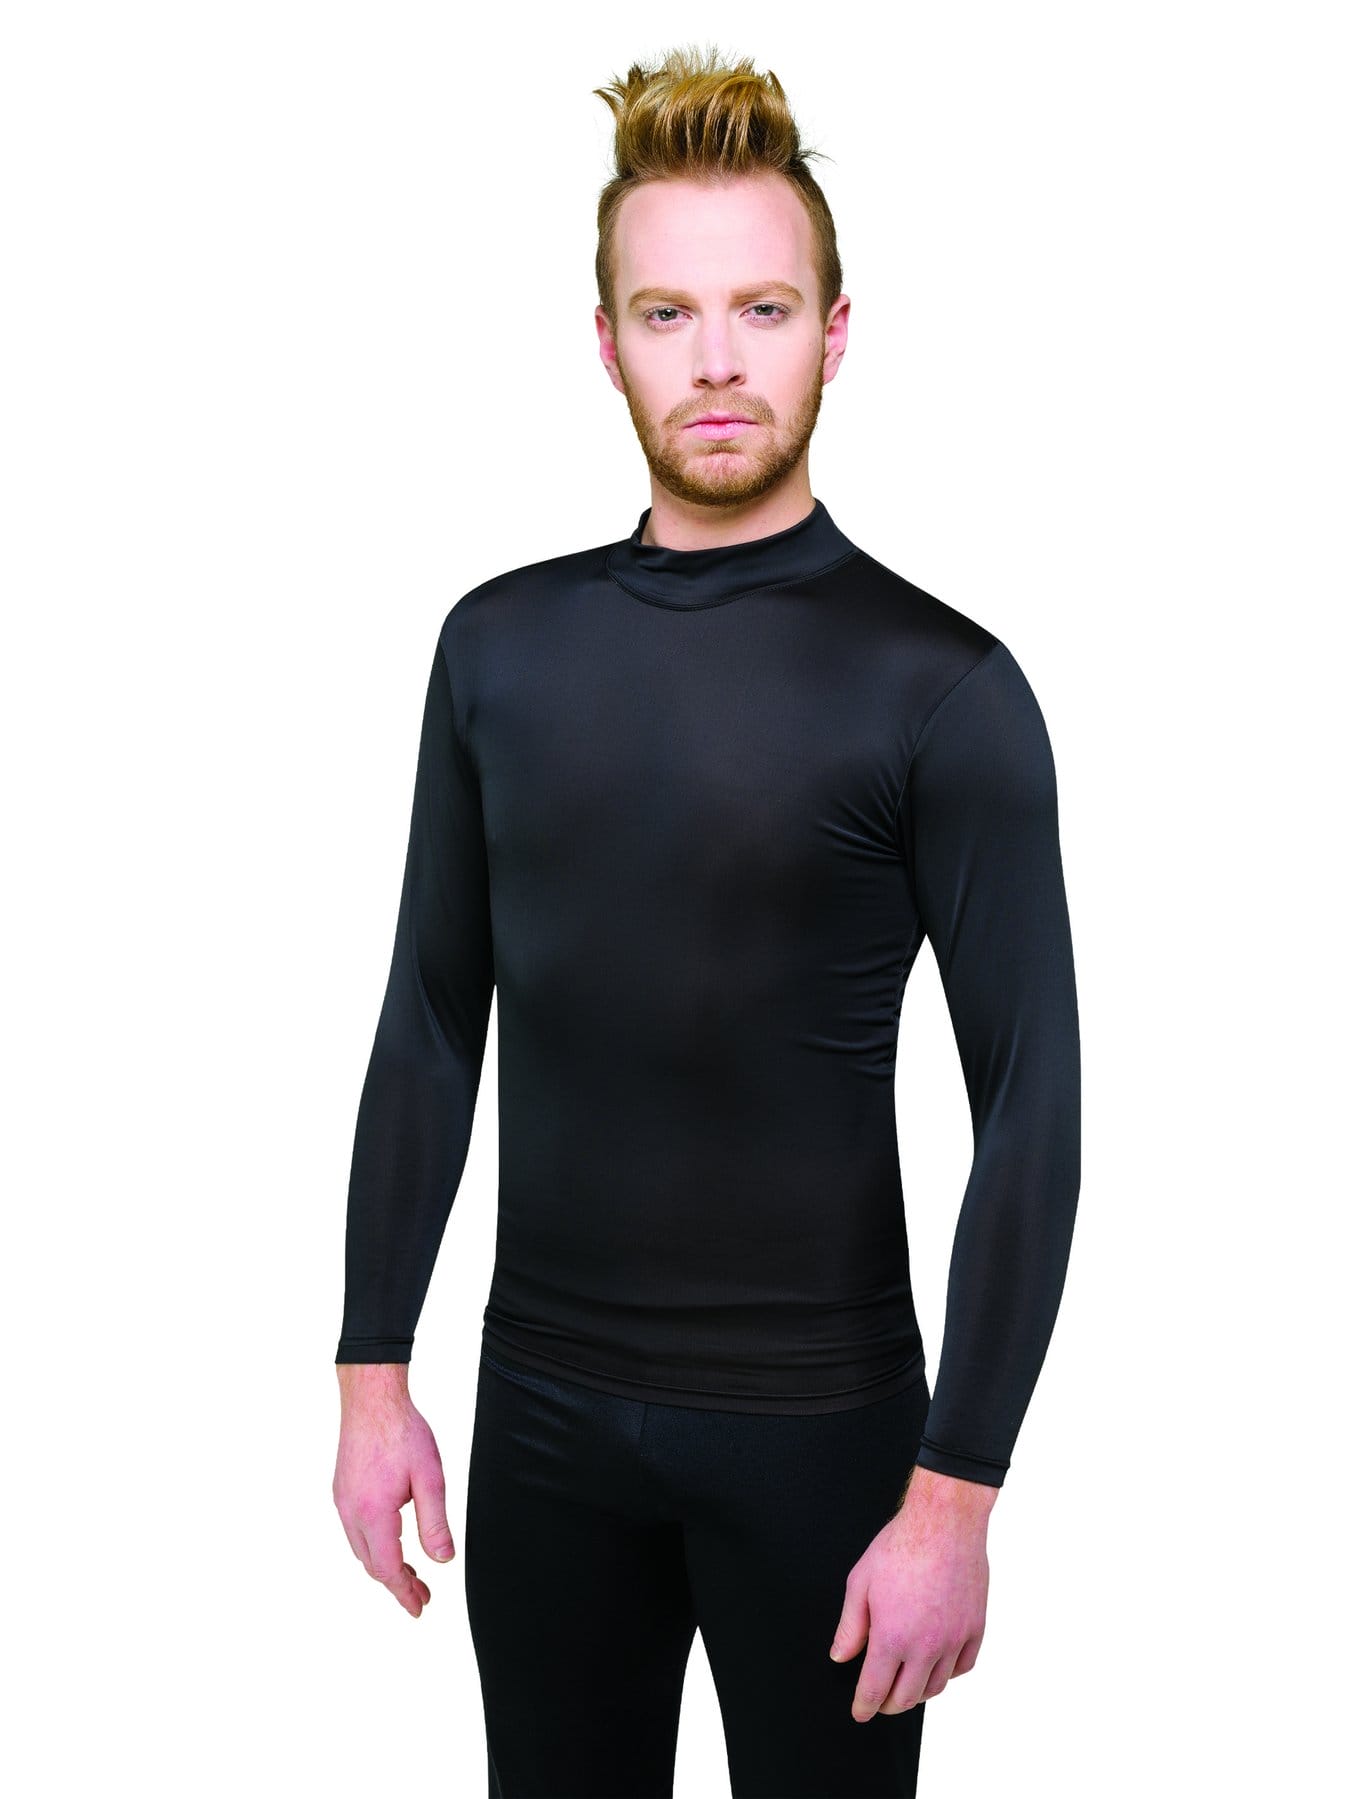 Styleplus Corelements Cool Long Sleeve Compression Shirts for